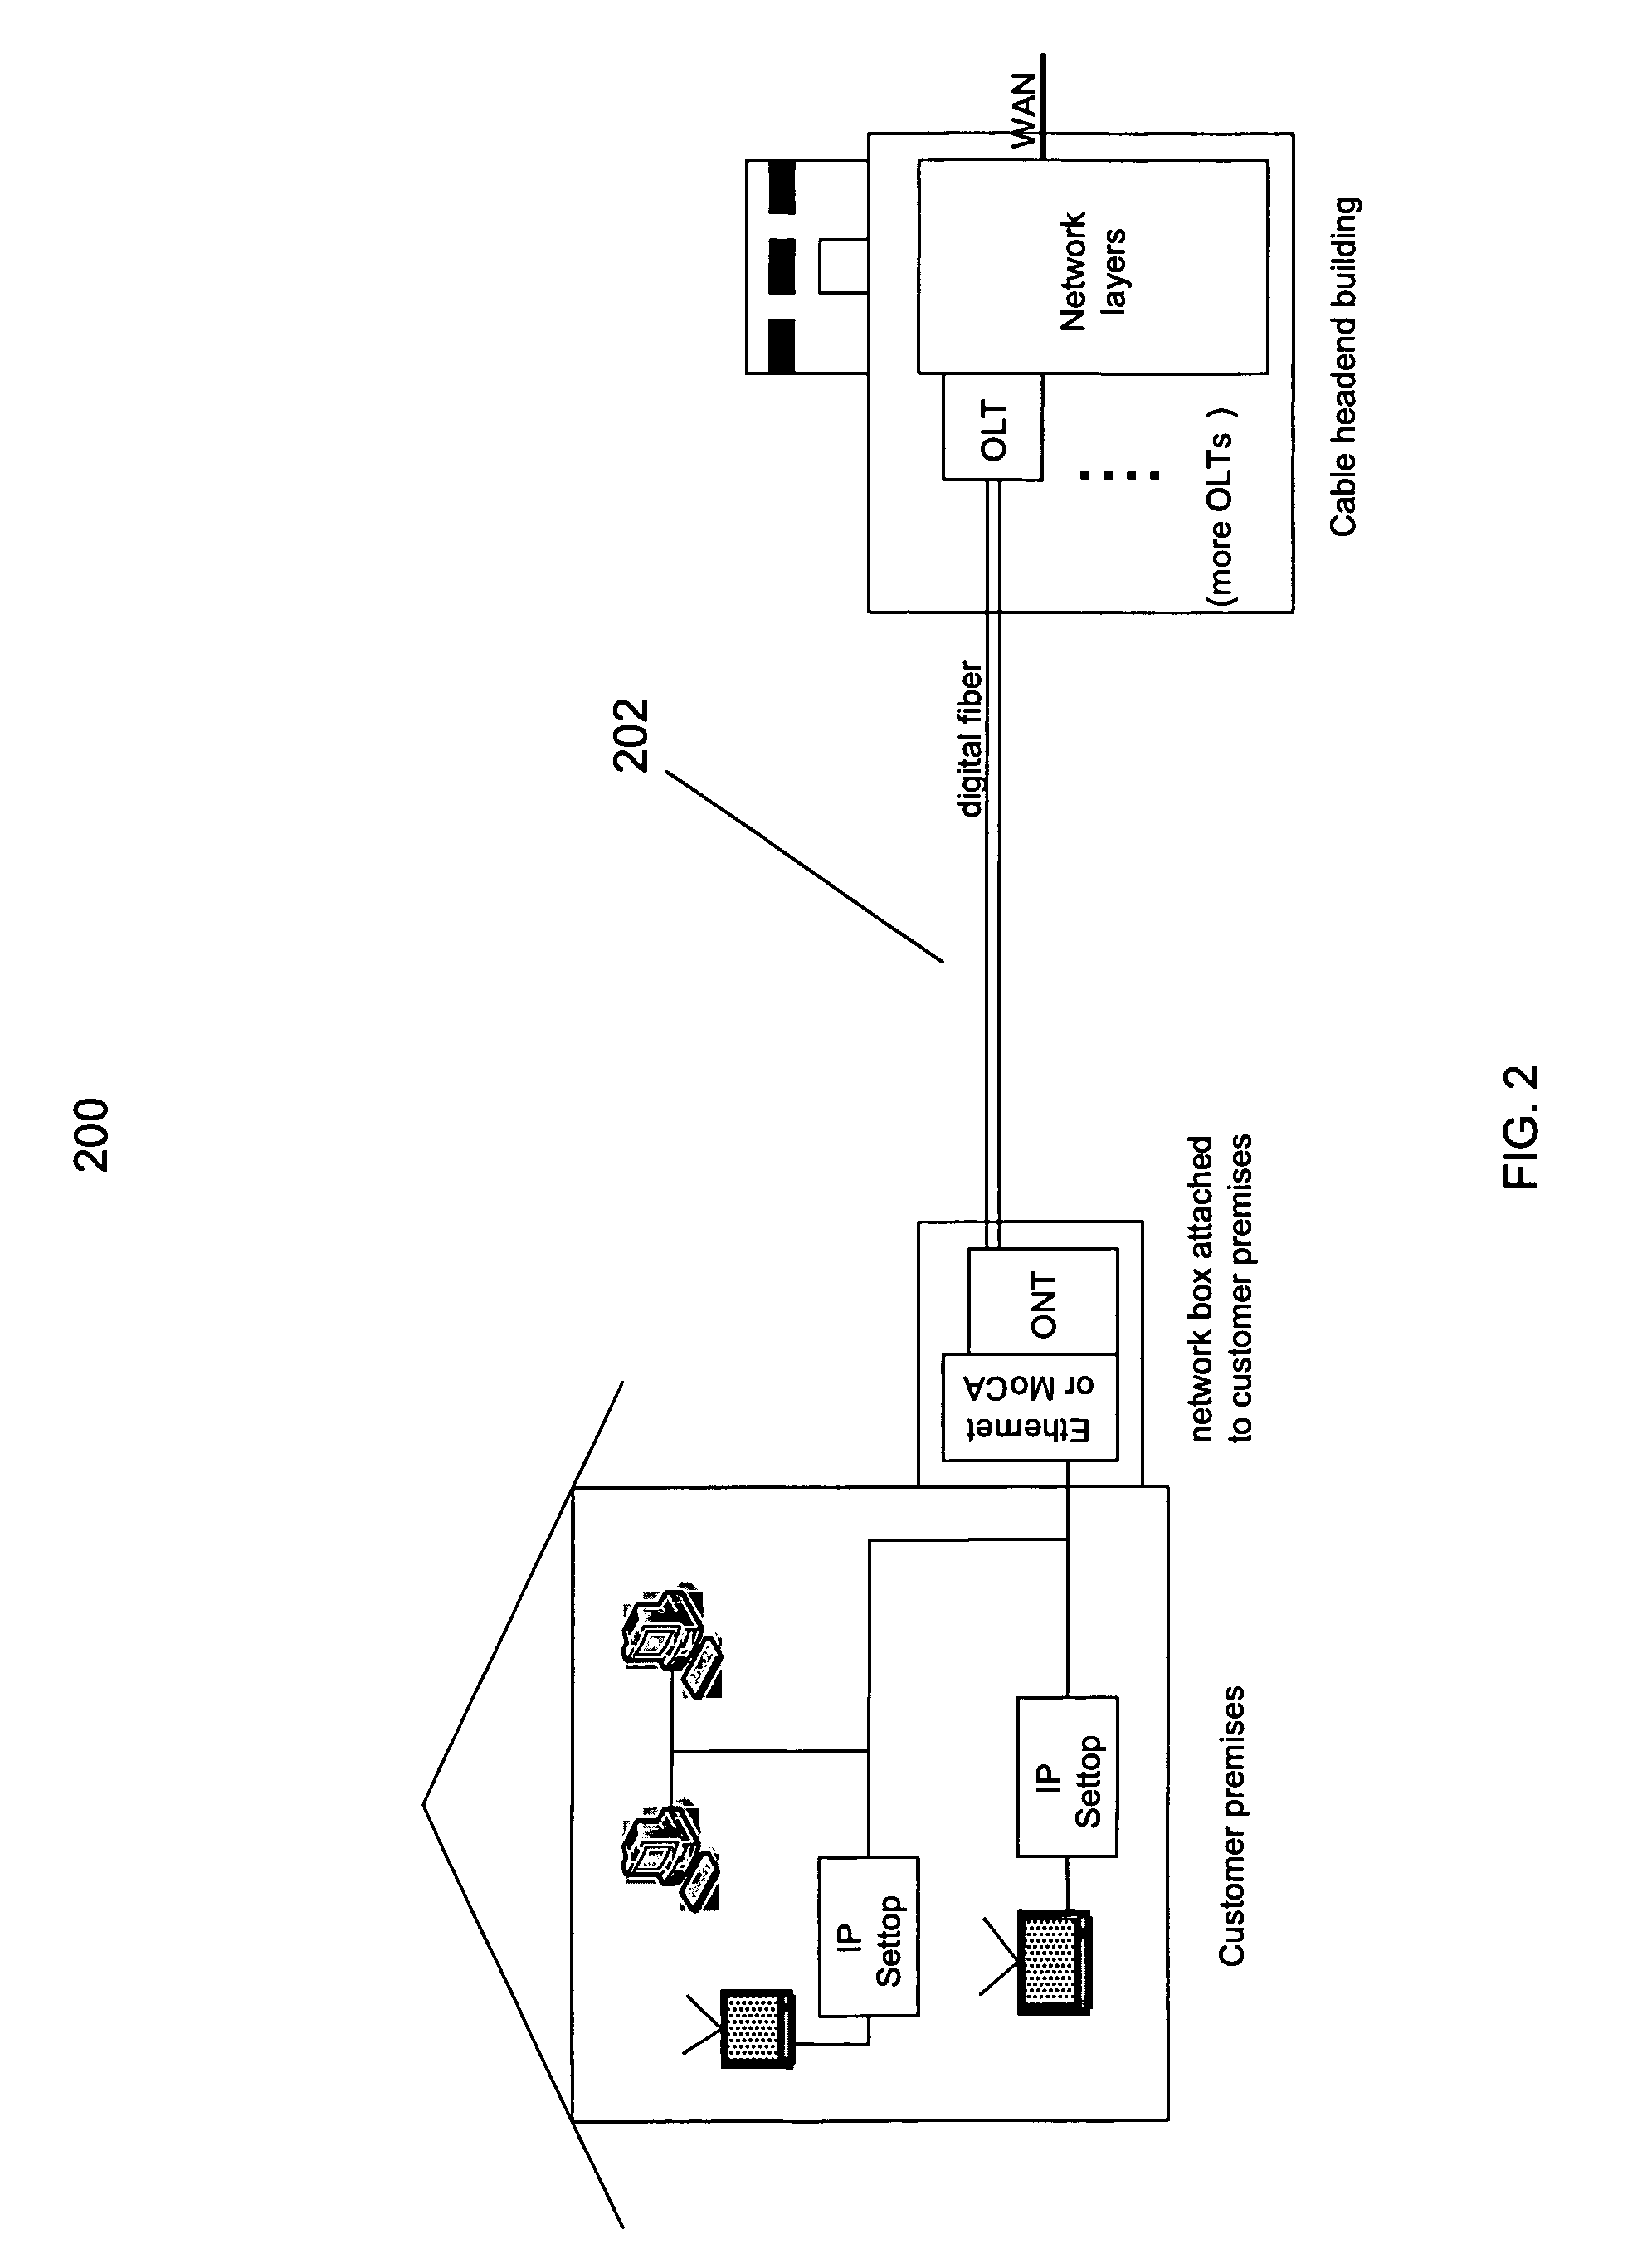 Network Architecture and Devices for Improving Performance of Hybrid Fiber Coax Cable Data Systems